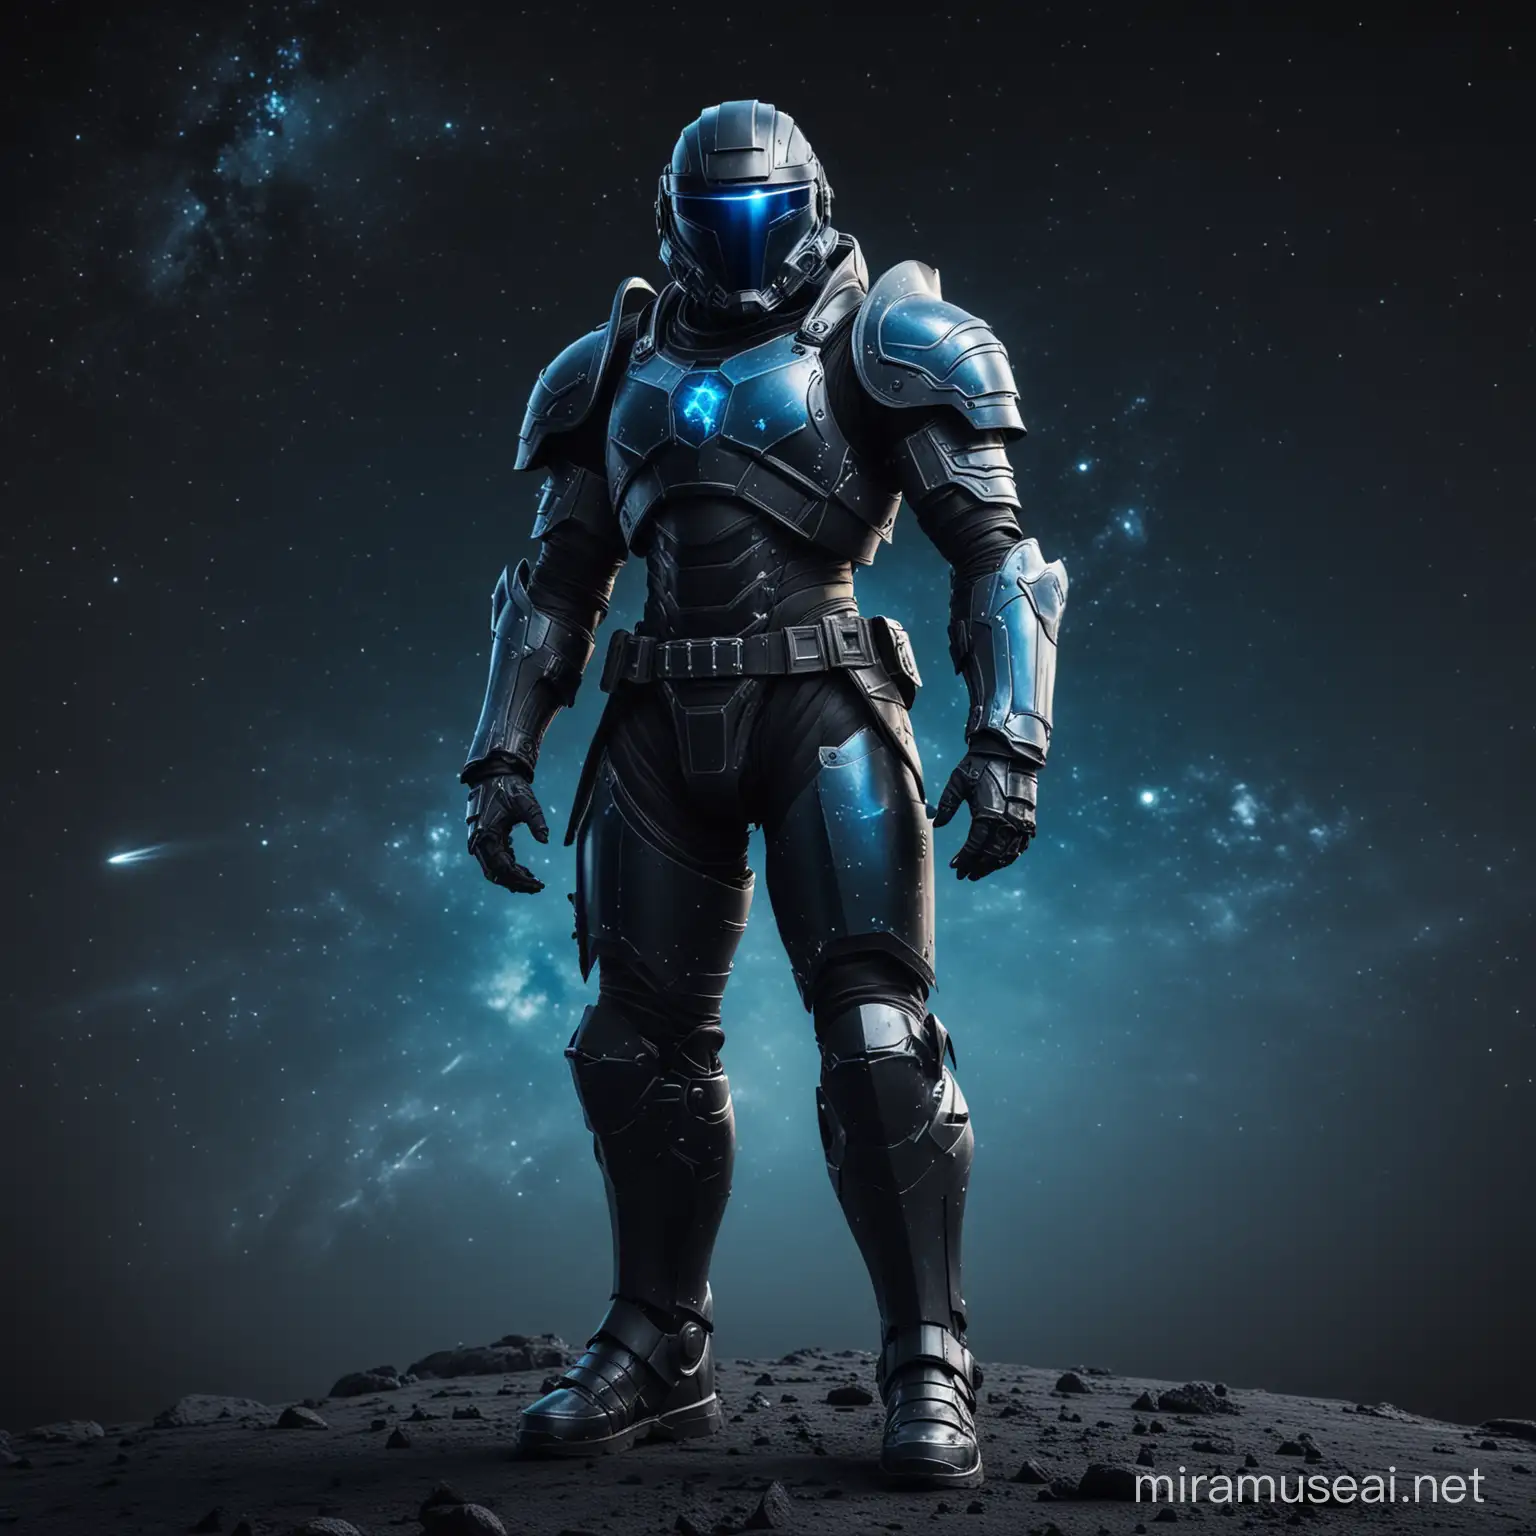 Knight in Black Space Armor on Dark Planet with Blue Shades